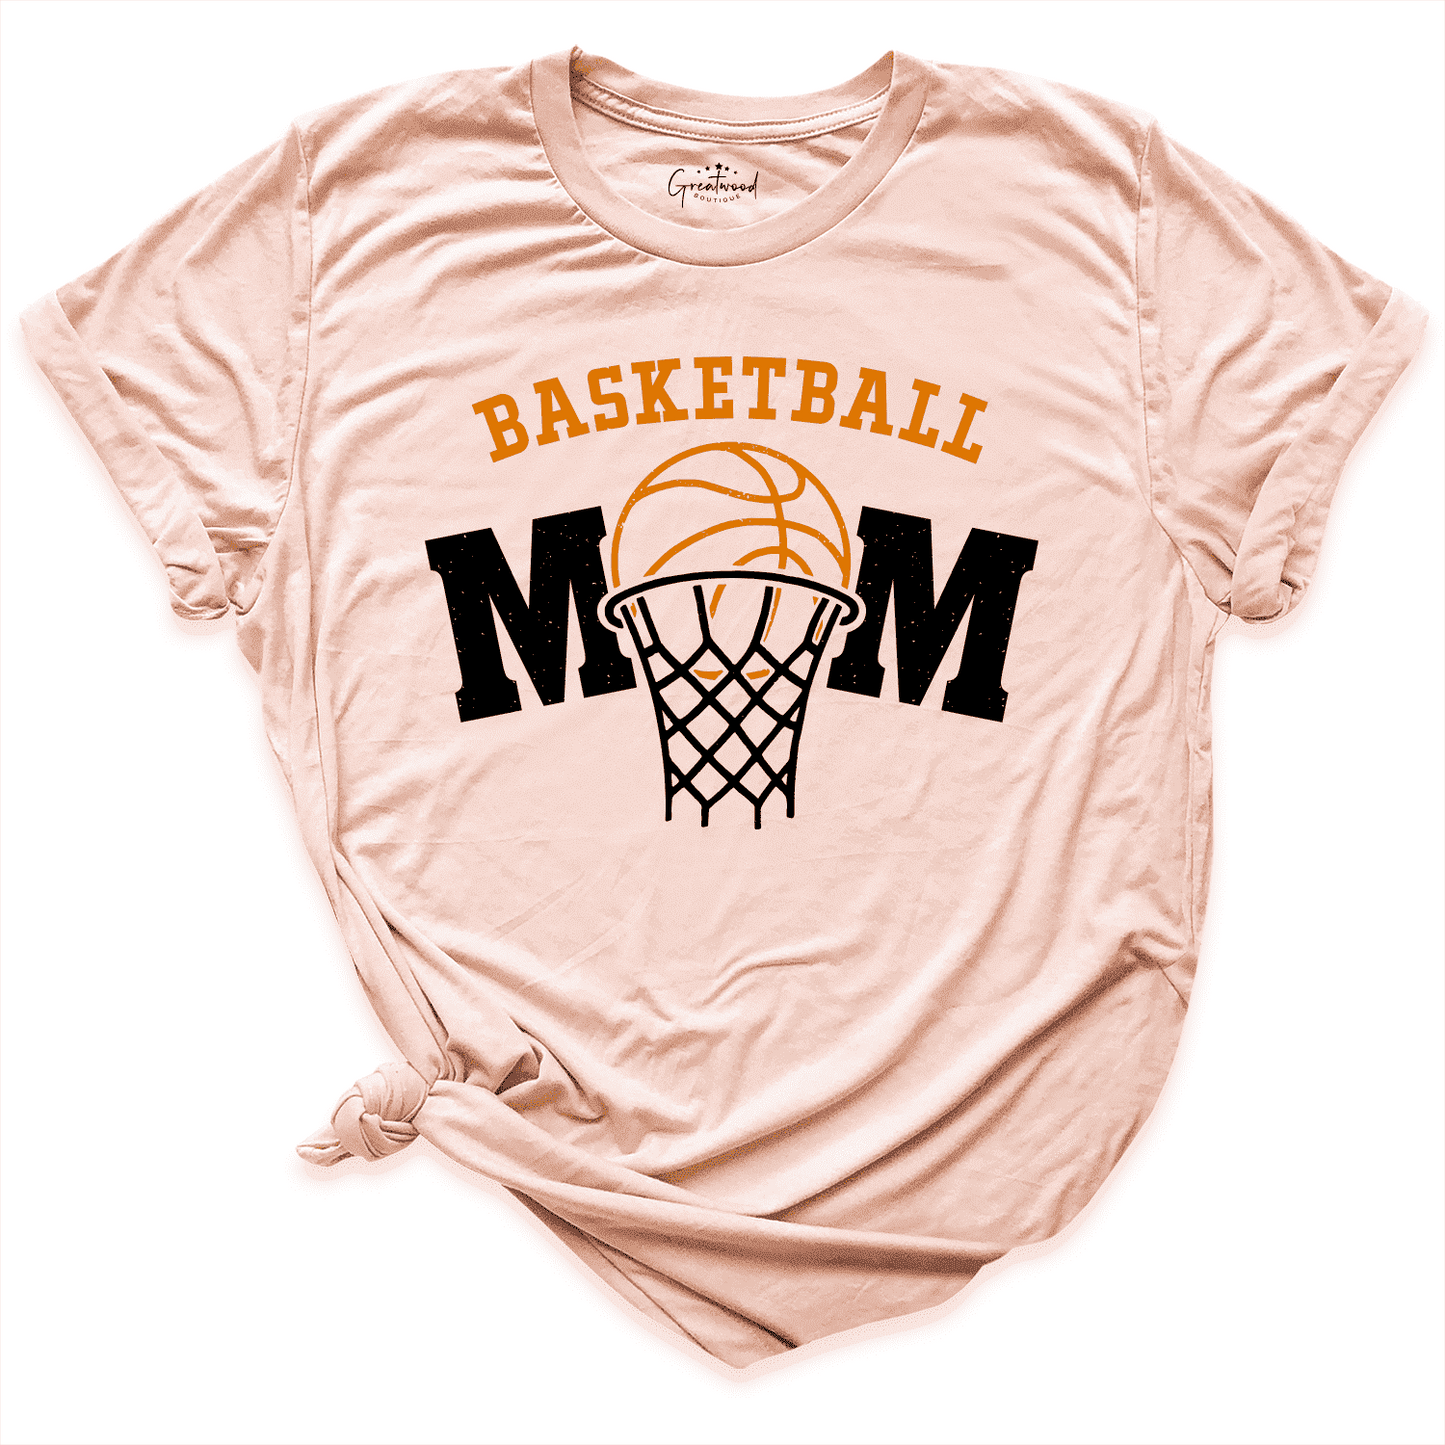 Basketball Mom Shirt Peach - Greatwood Boutique